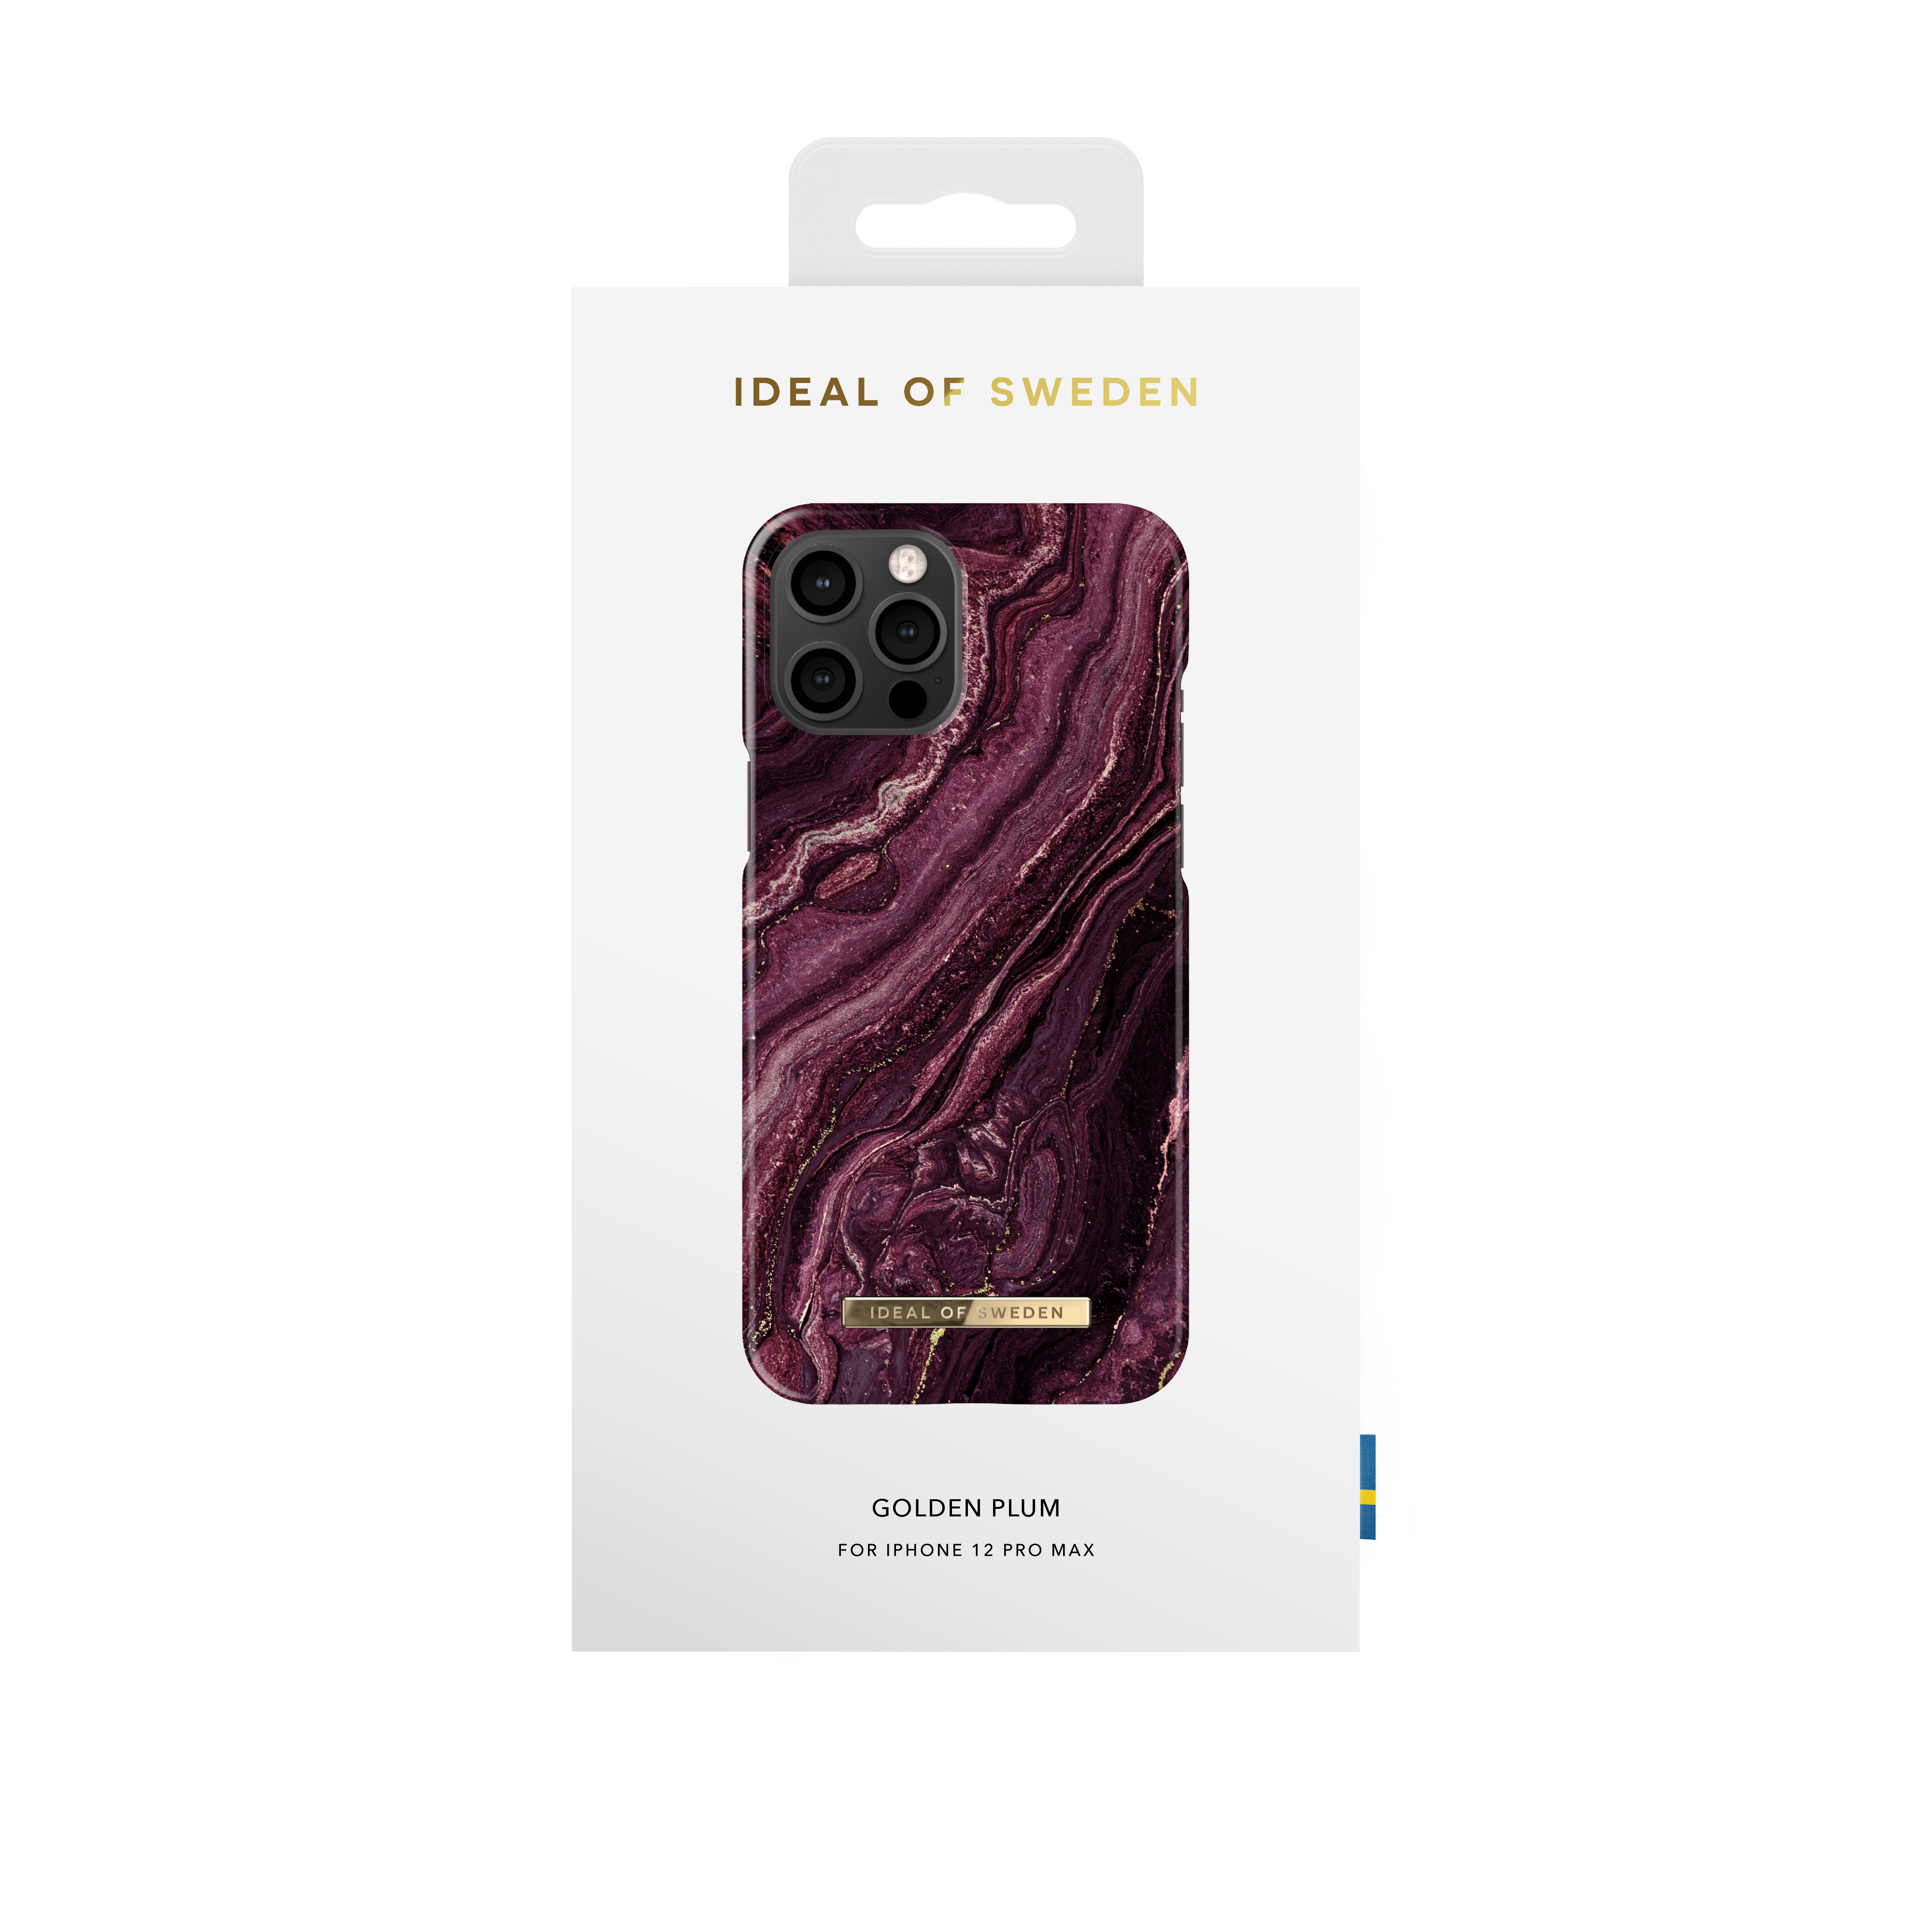 Pro Apple, OF Backcover, Max, 12 SWEDEN Golden IDFCAW20-2067-232, IPhone IDEAL Plum